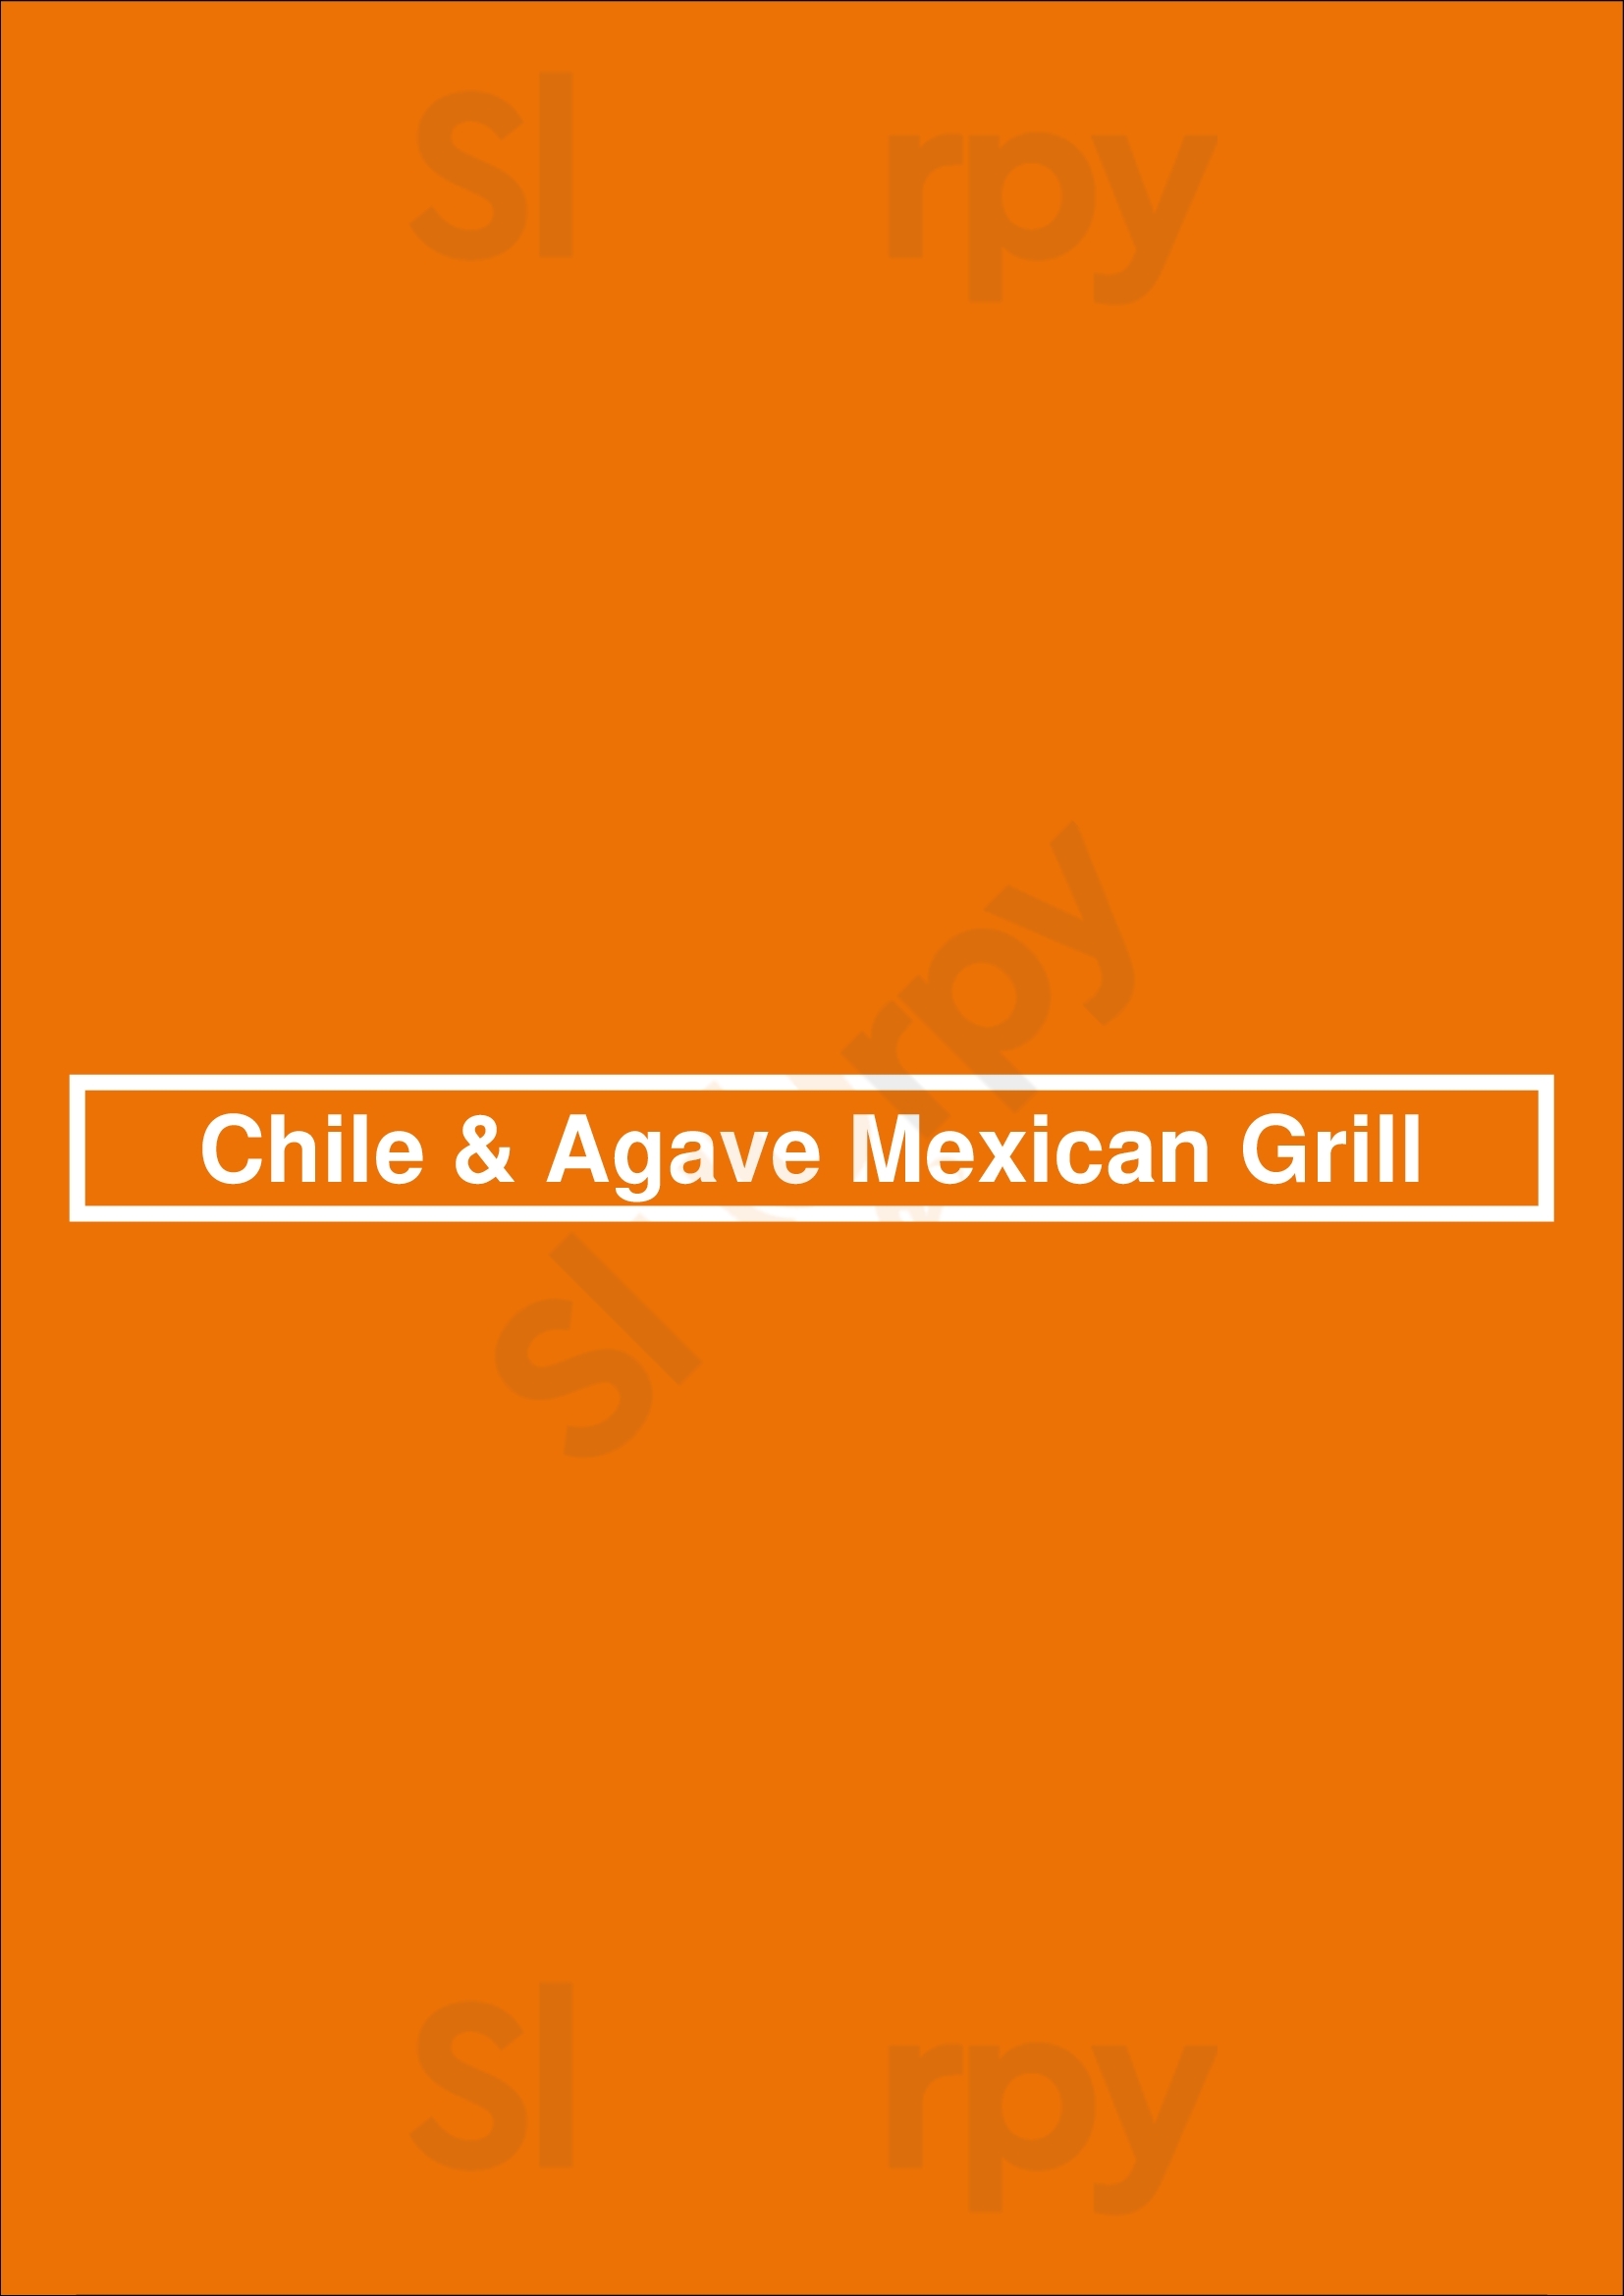 Chile & Agave Mexican Grill St. Catharines Menu - 1